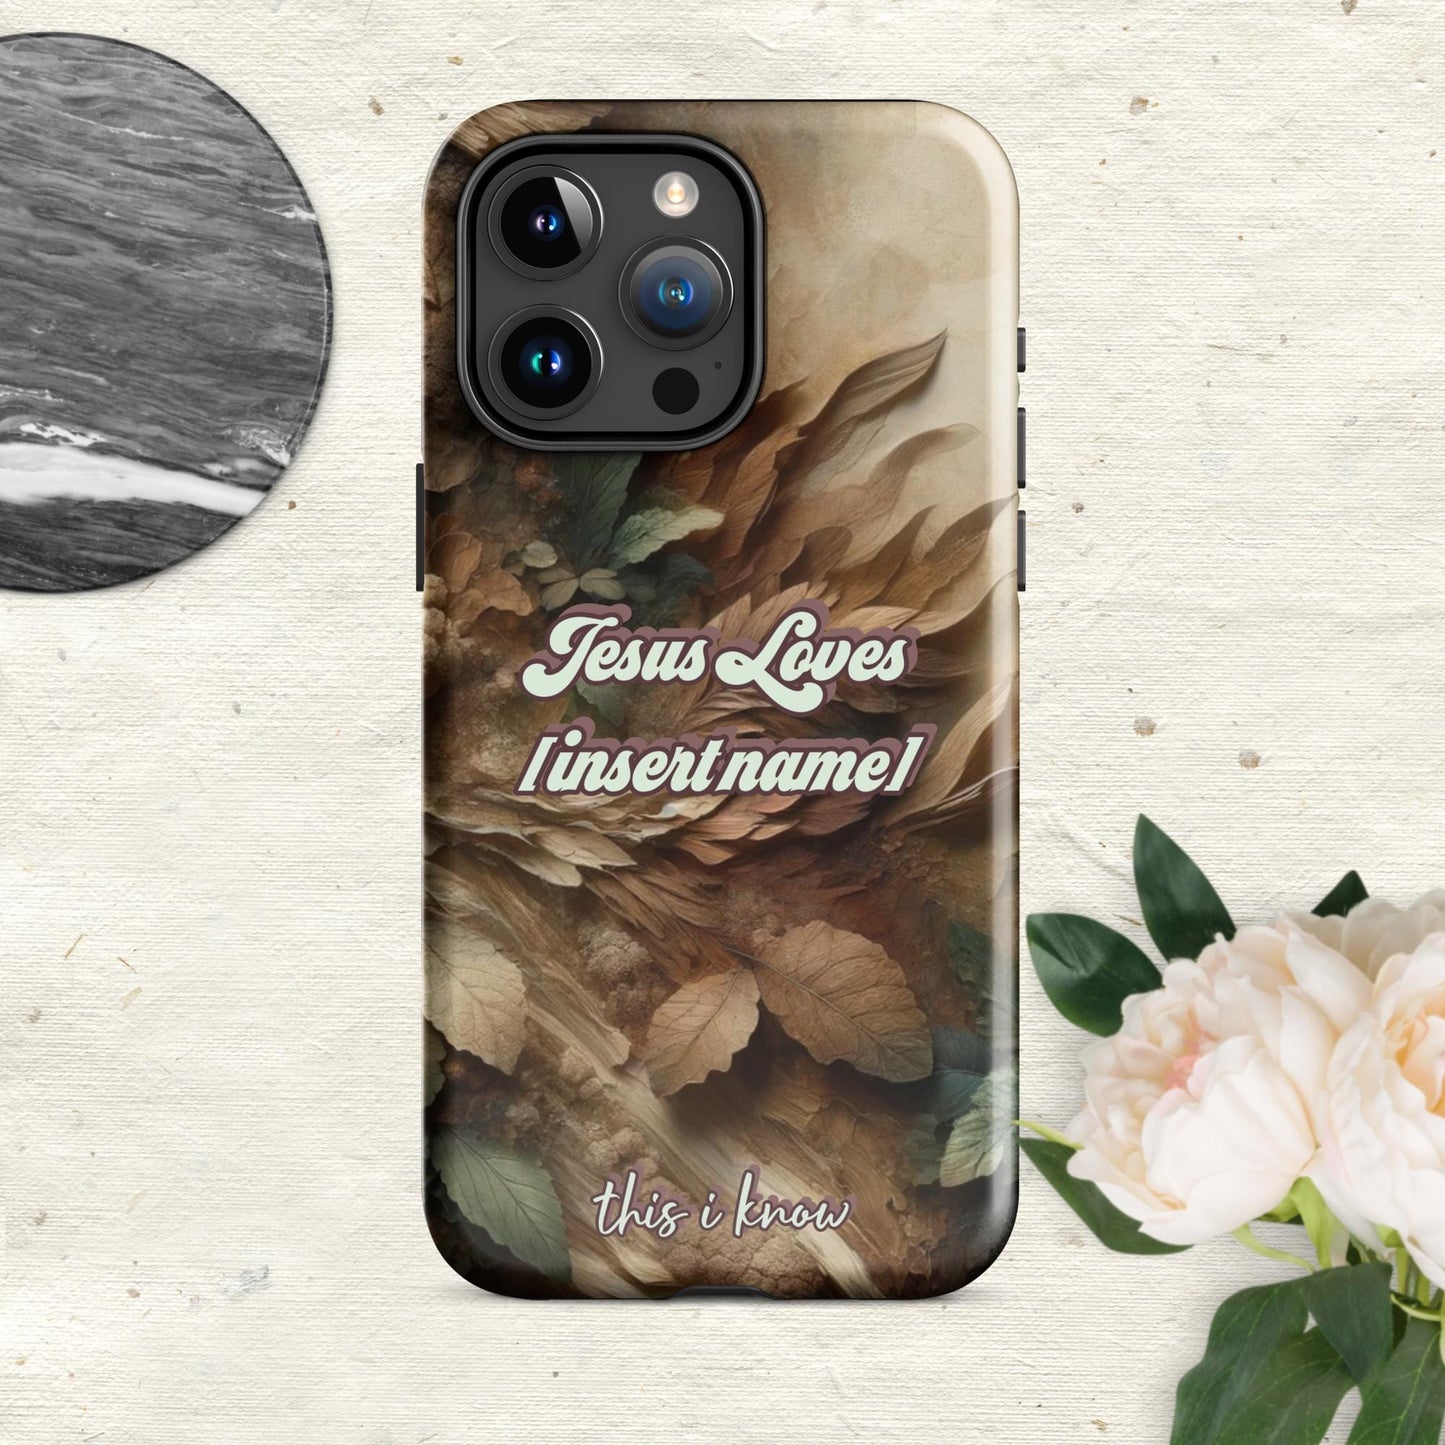 Trendyguard Glossy / iPhone 15 Pro Max Jesus Loves [insertname] This I Know | Custom Tough Case for iPhone®